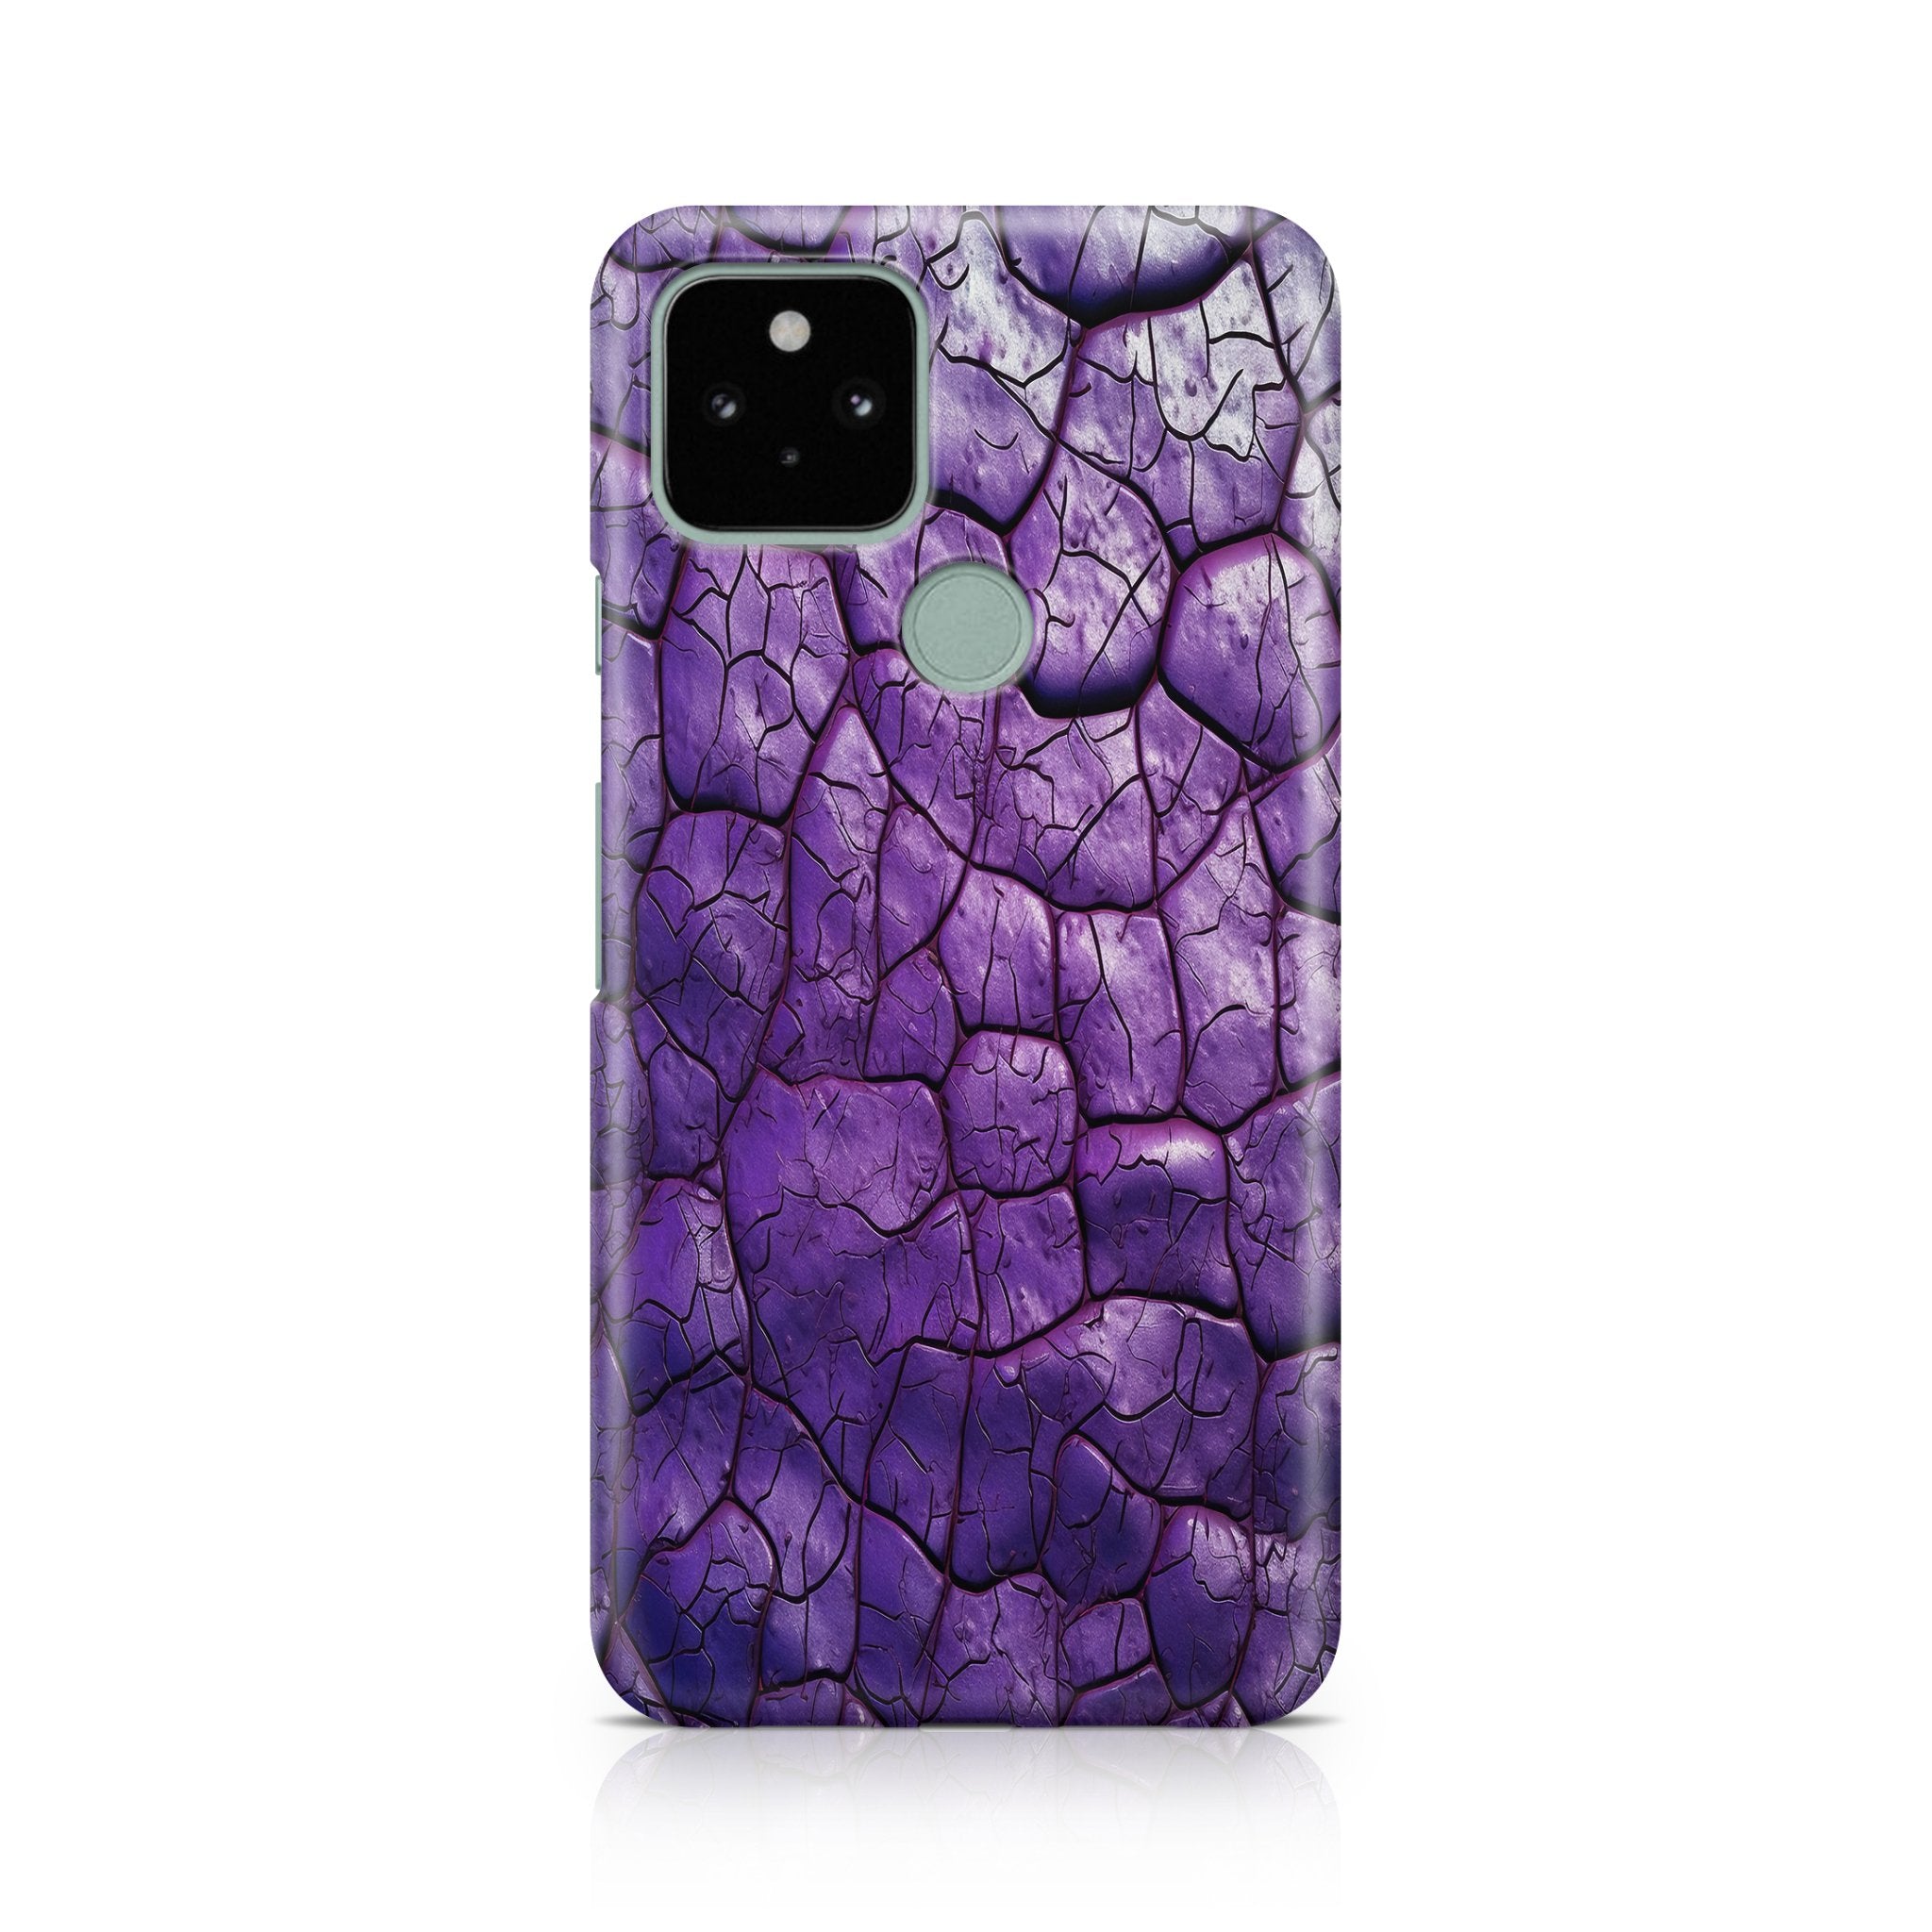 Purple Reptile Skin - Google phone case designs by CaseSwagger